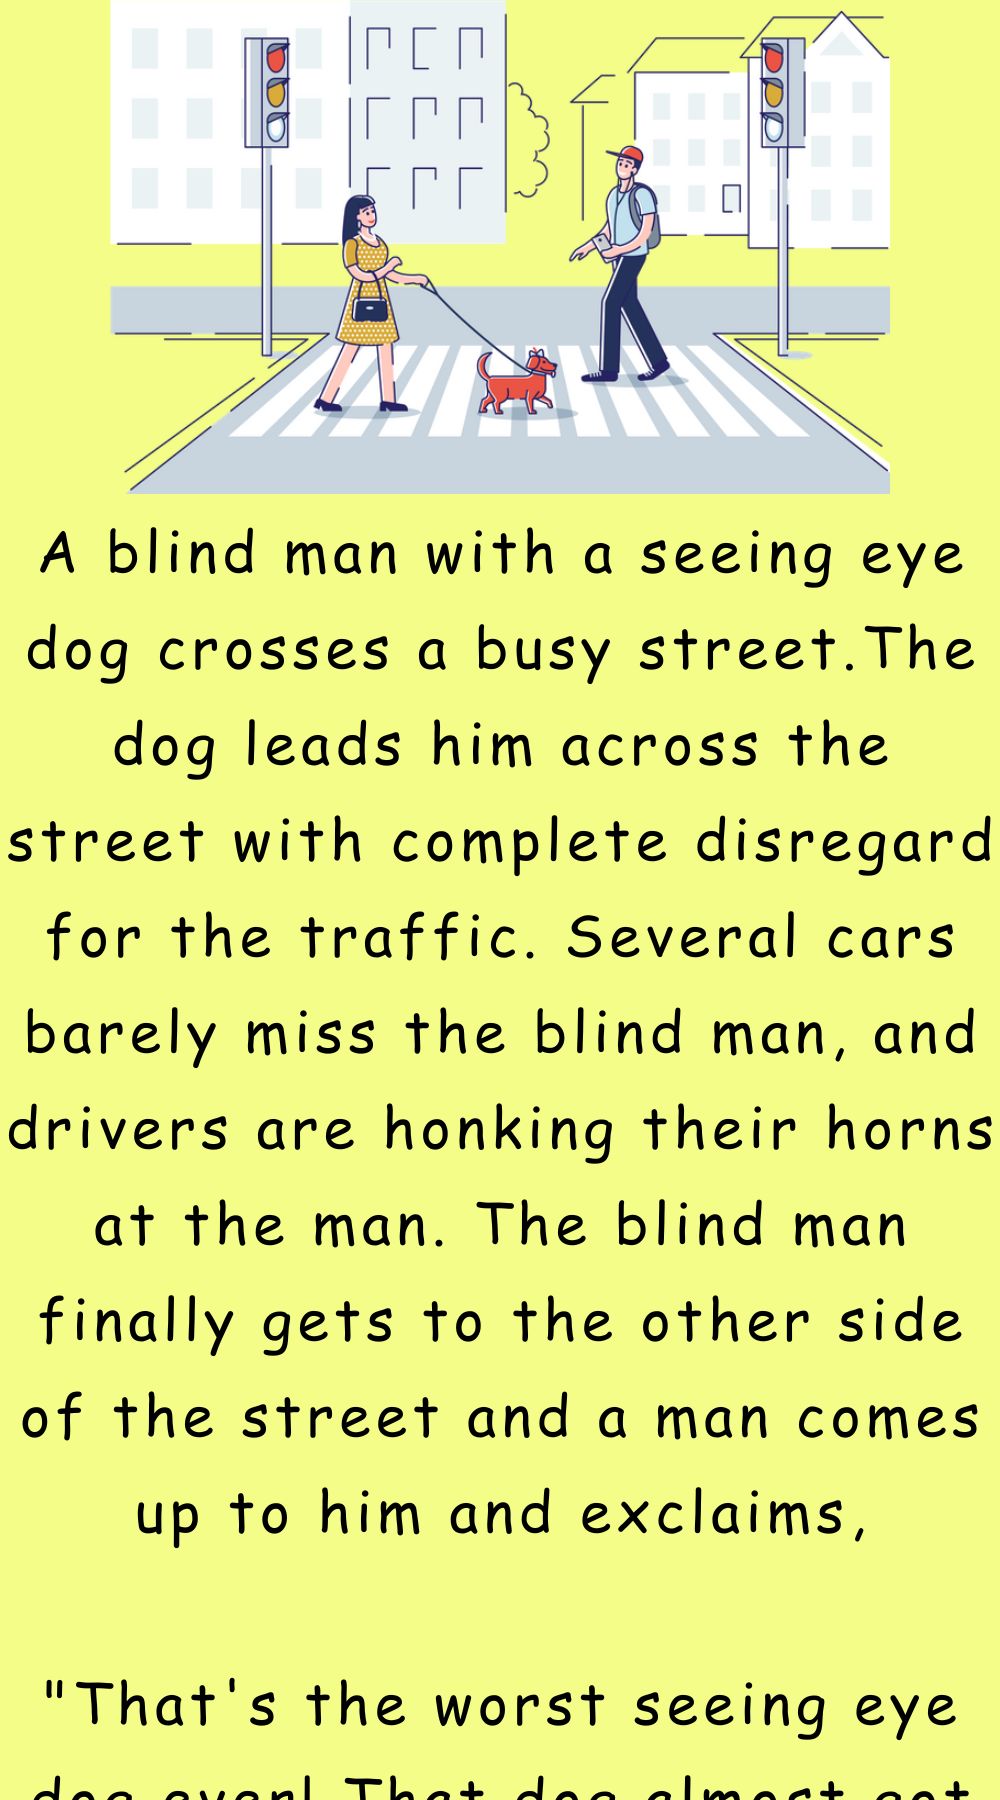 A blind man with a seeing eye dog crosses